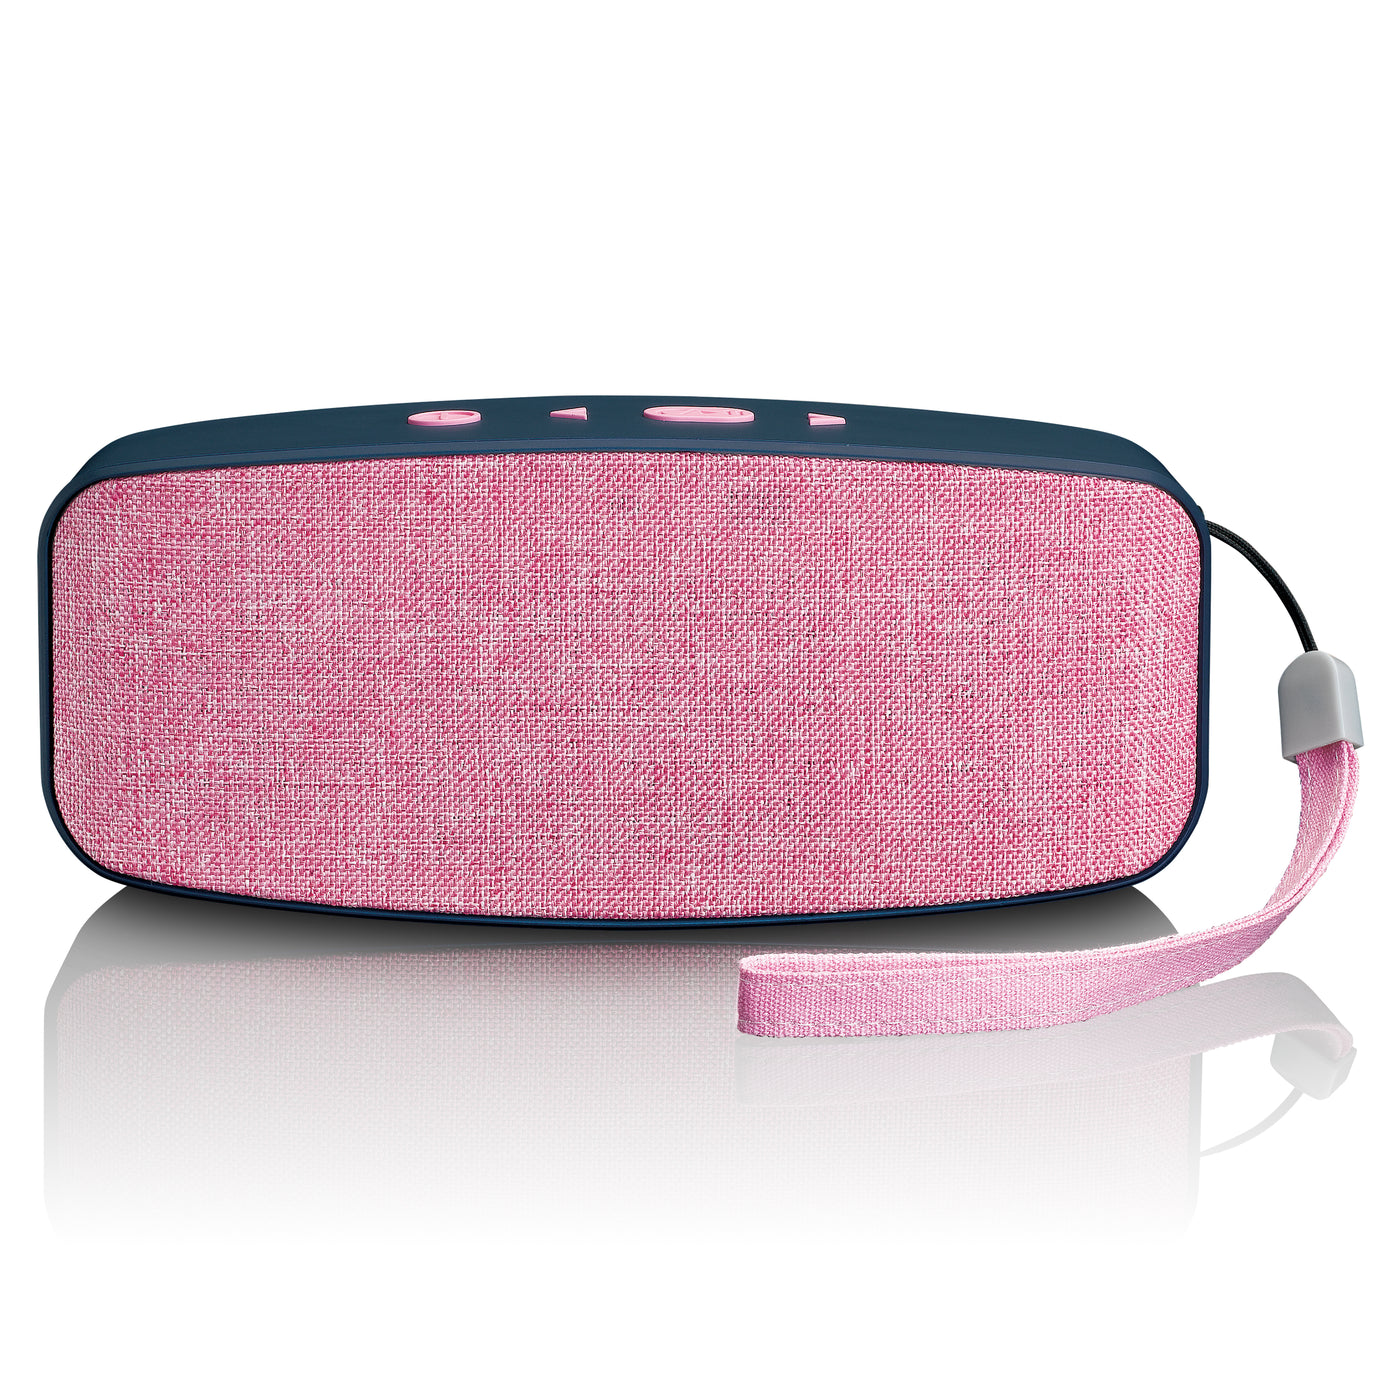 LENCO BT-130PK - Stereo Bluetooth® speaker with 6w output power and carry strap - Pink